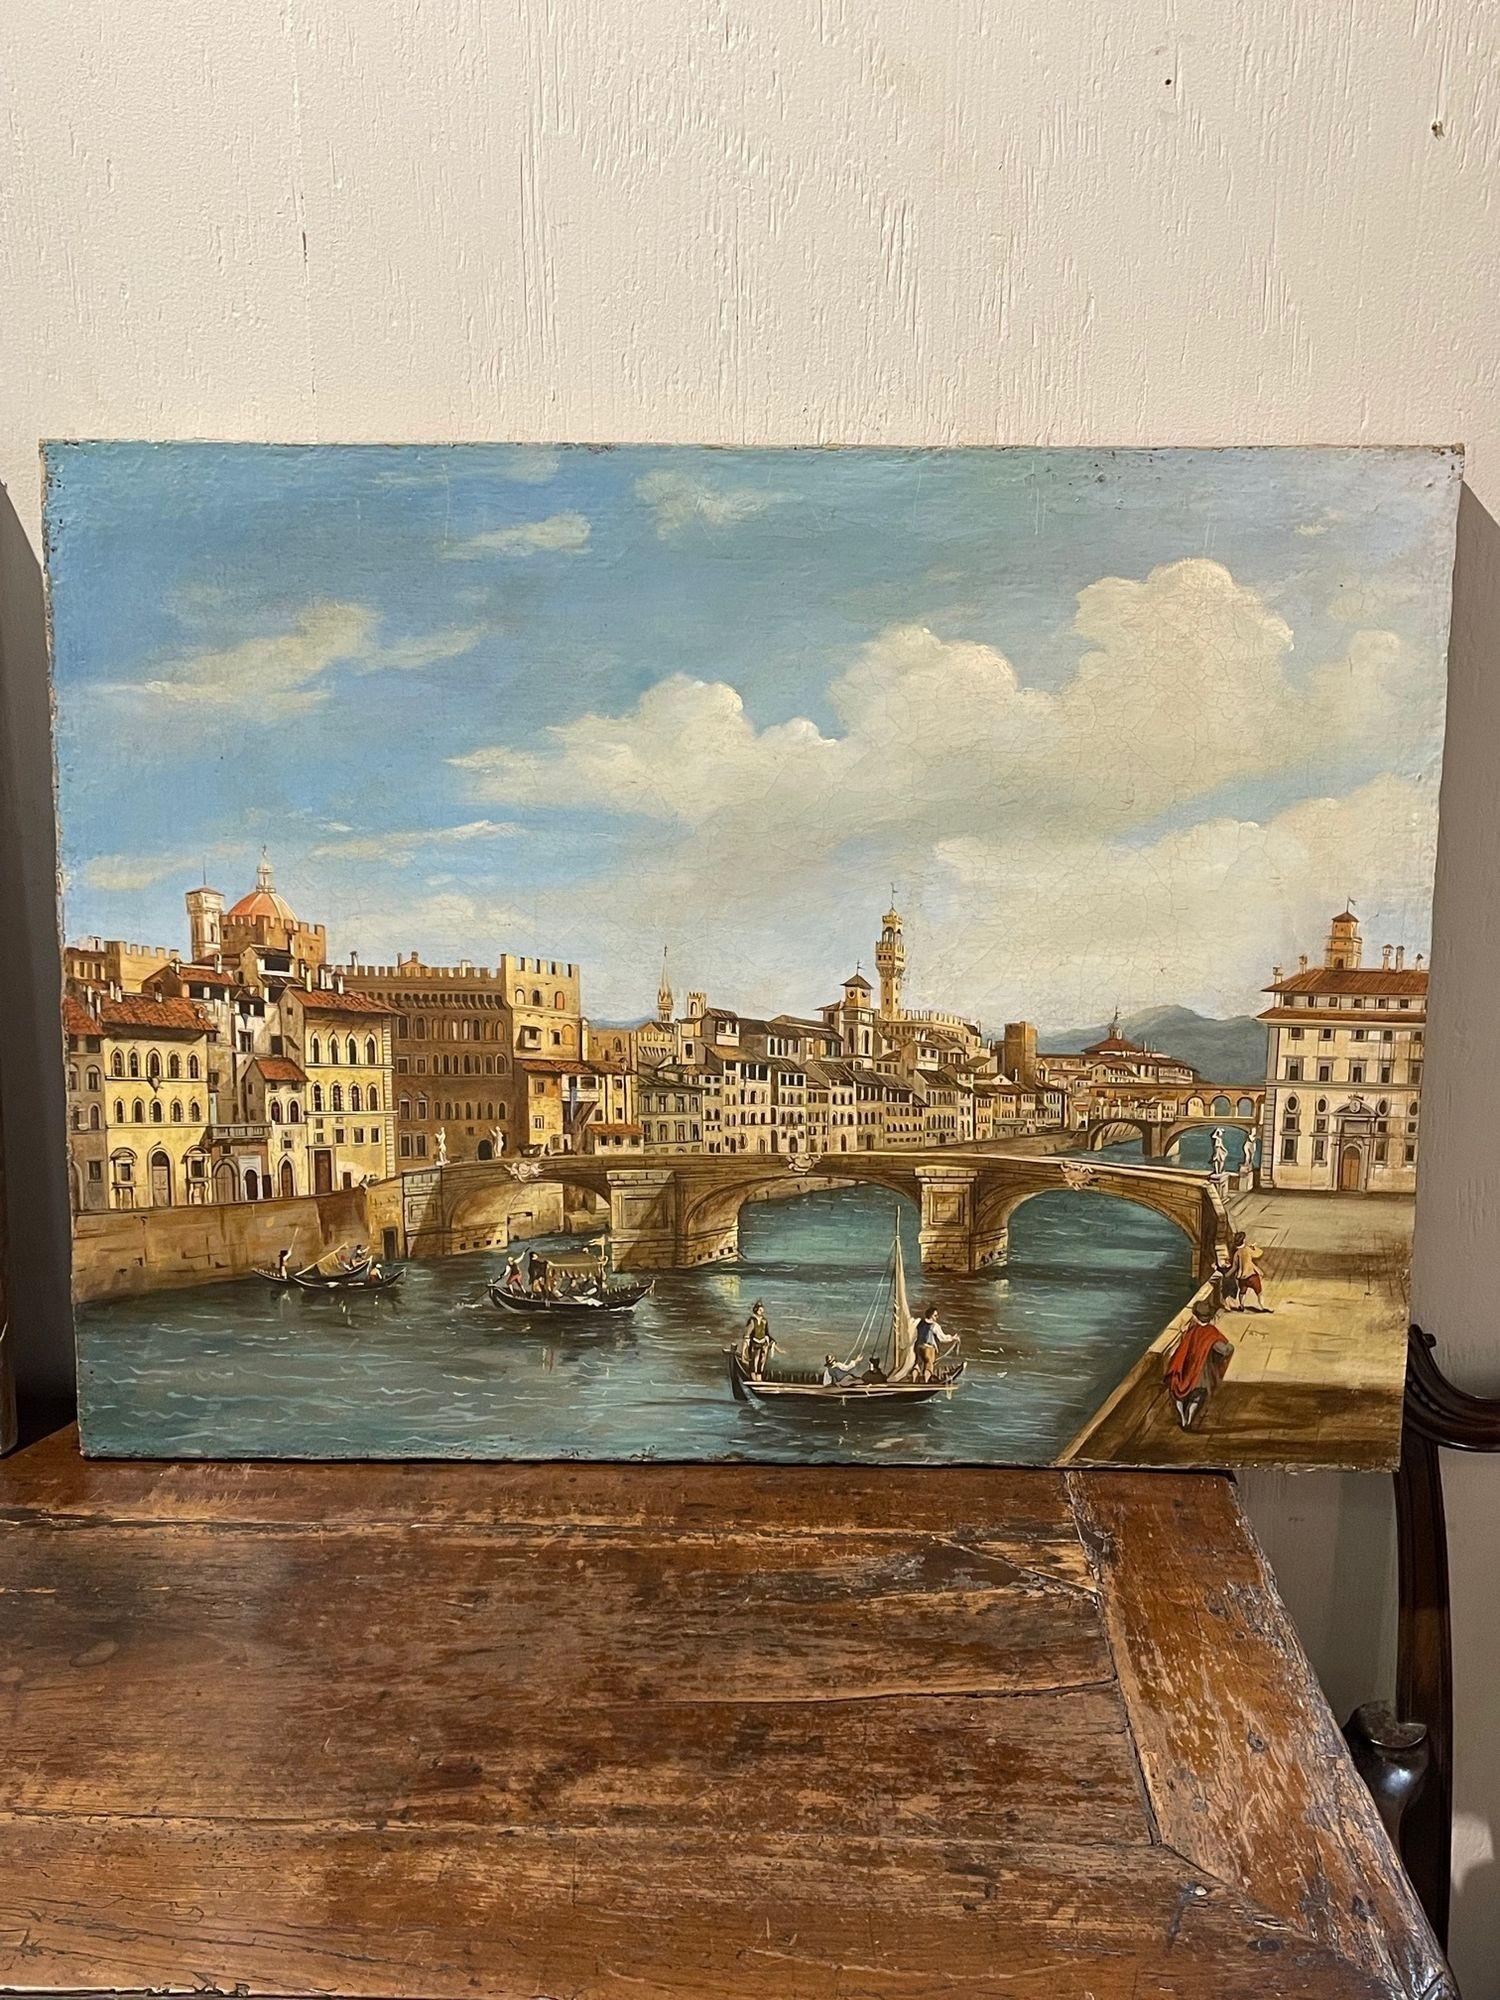 Rare pair of 19th century Venetian oil paintings on canvas. These paintings depict a Venetian harbor scene with boats, buildings and people. Very fine works of art!.